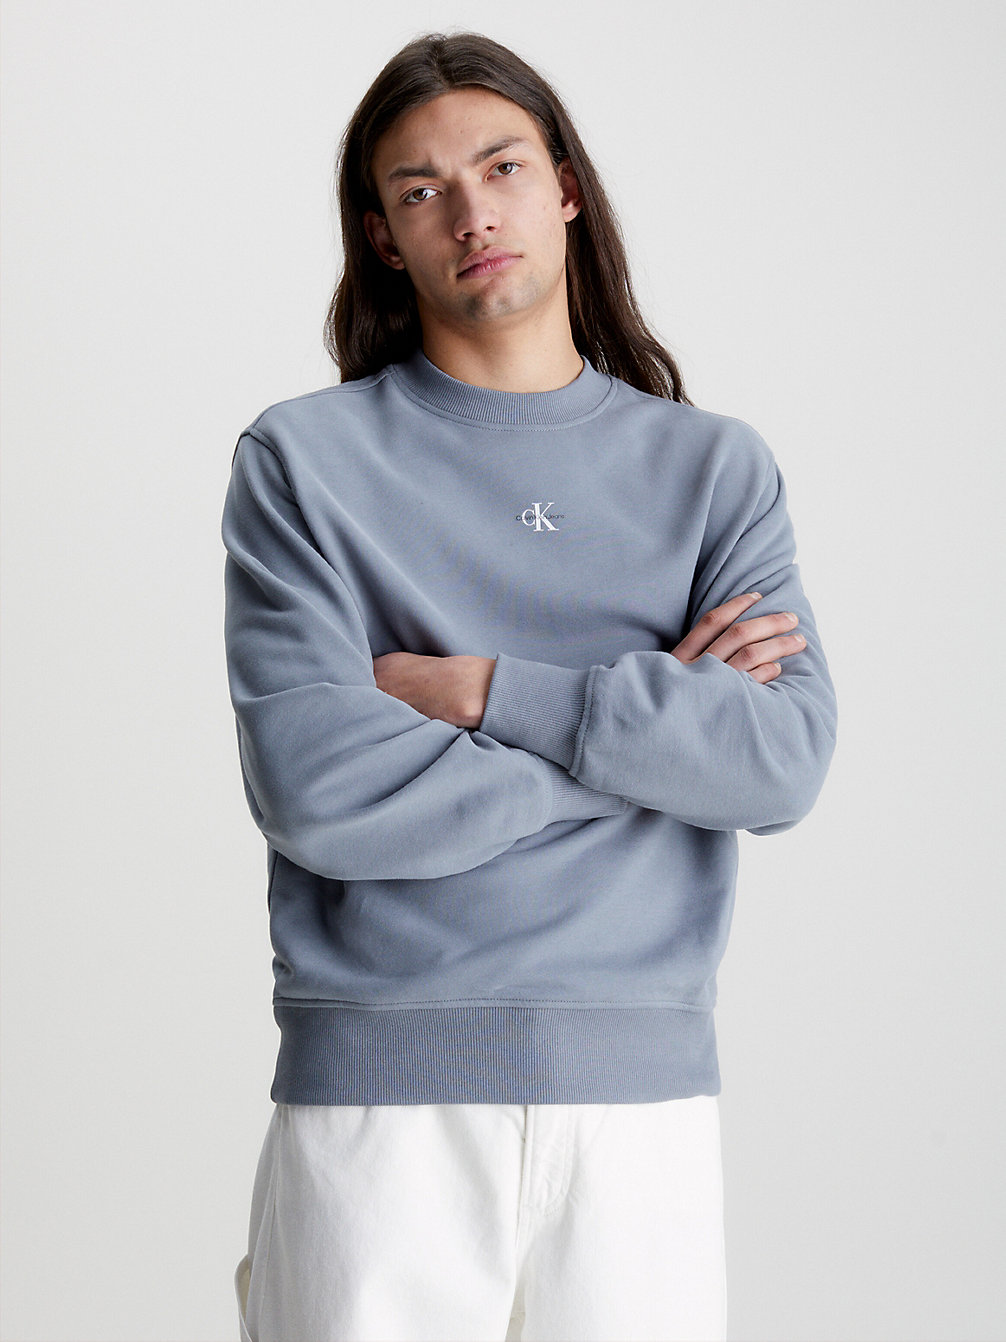 Sweat-Shirt Relaxed Avec Monogramme > OVERCAST GREY > undefined hommes > Calvin Klein